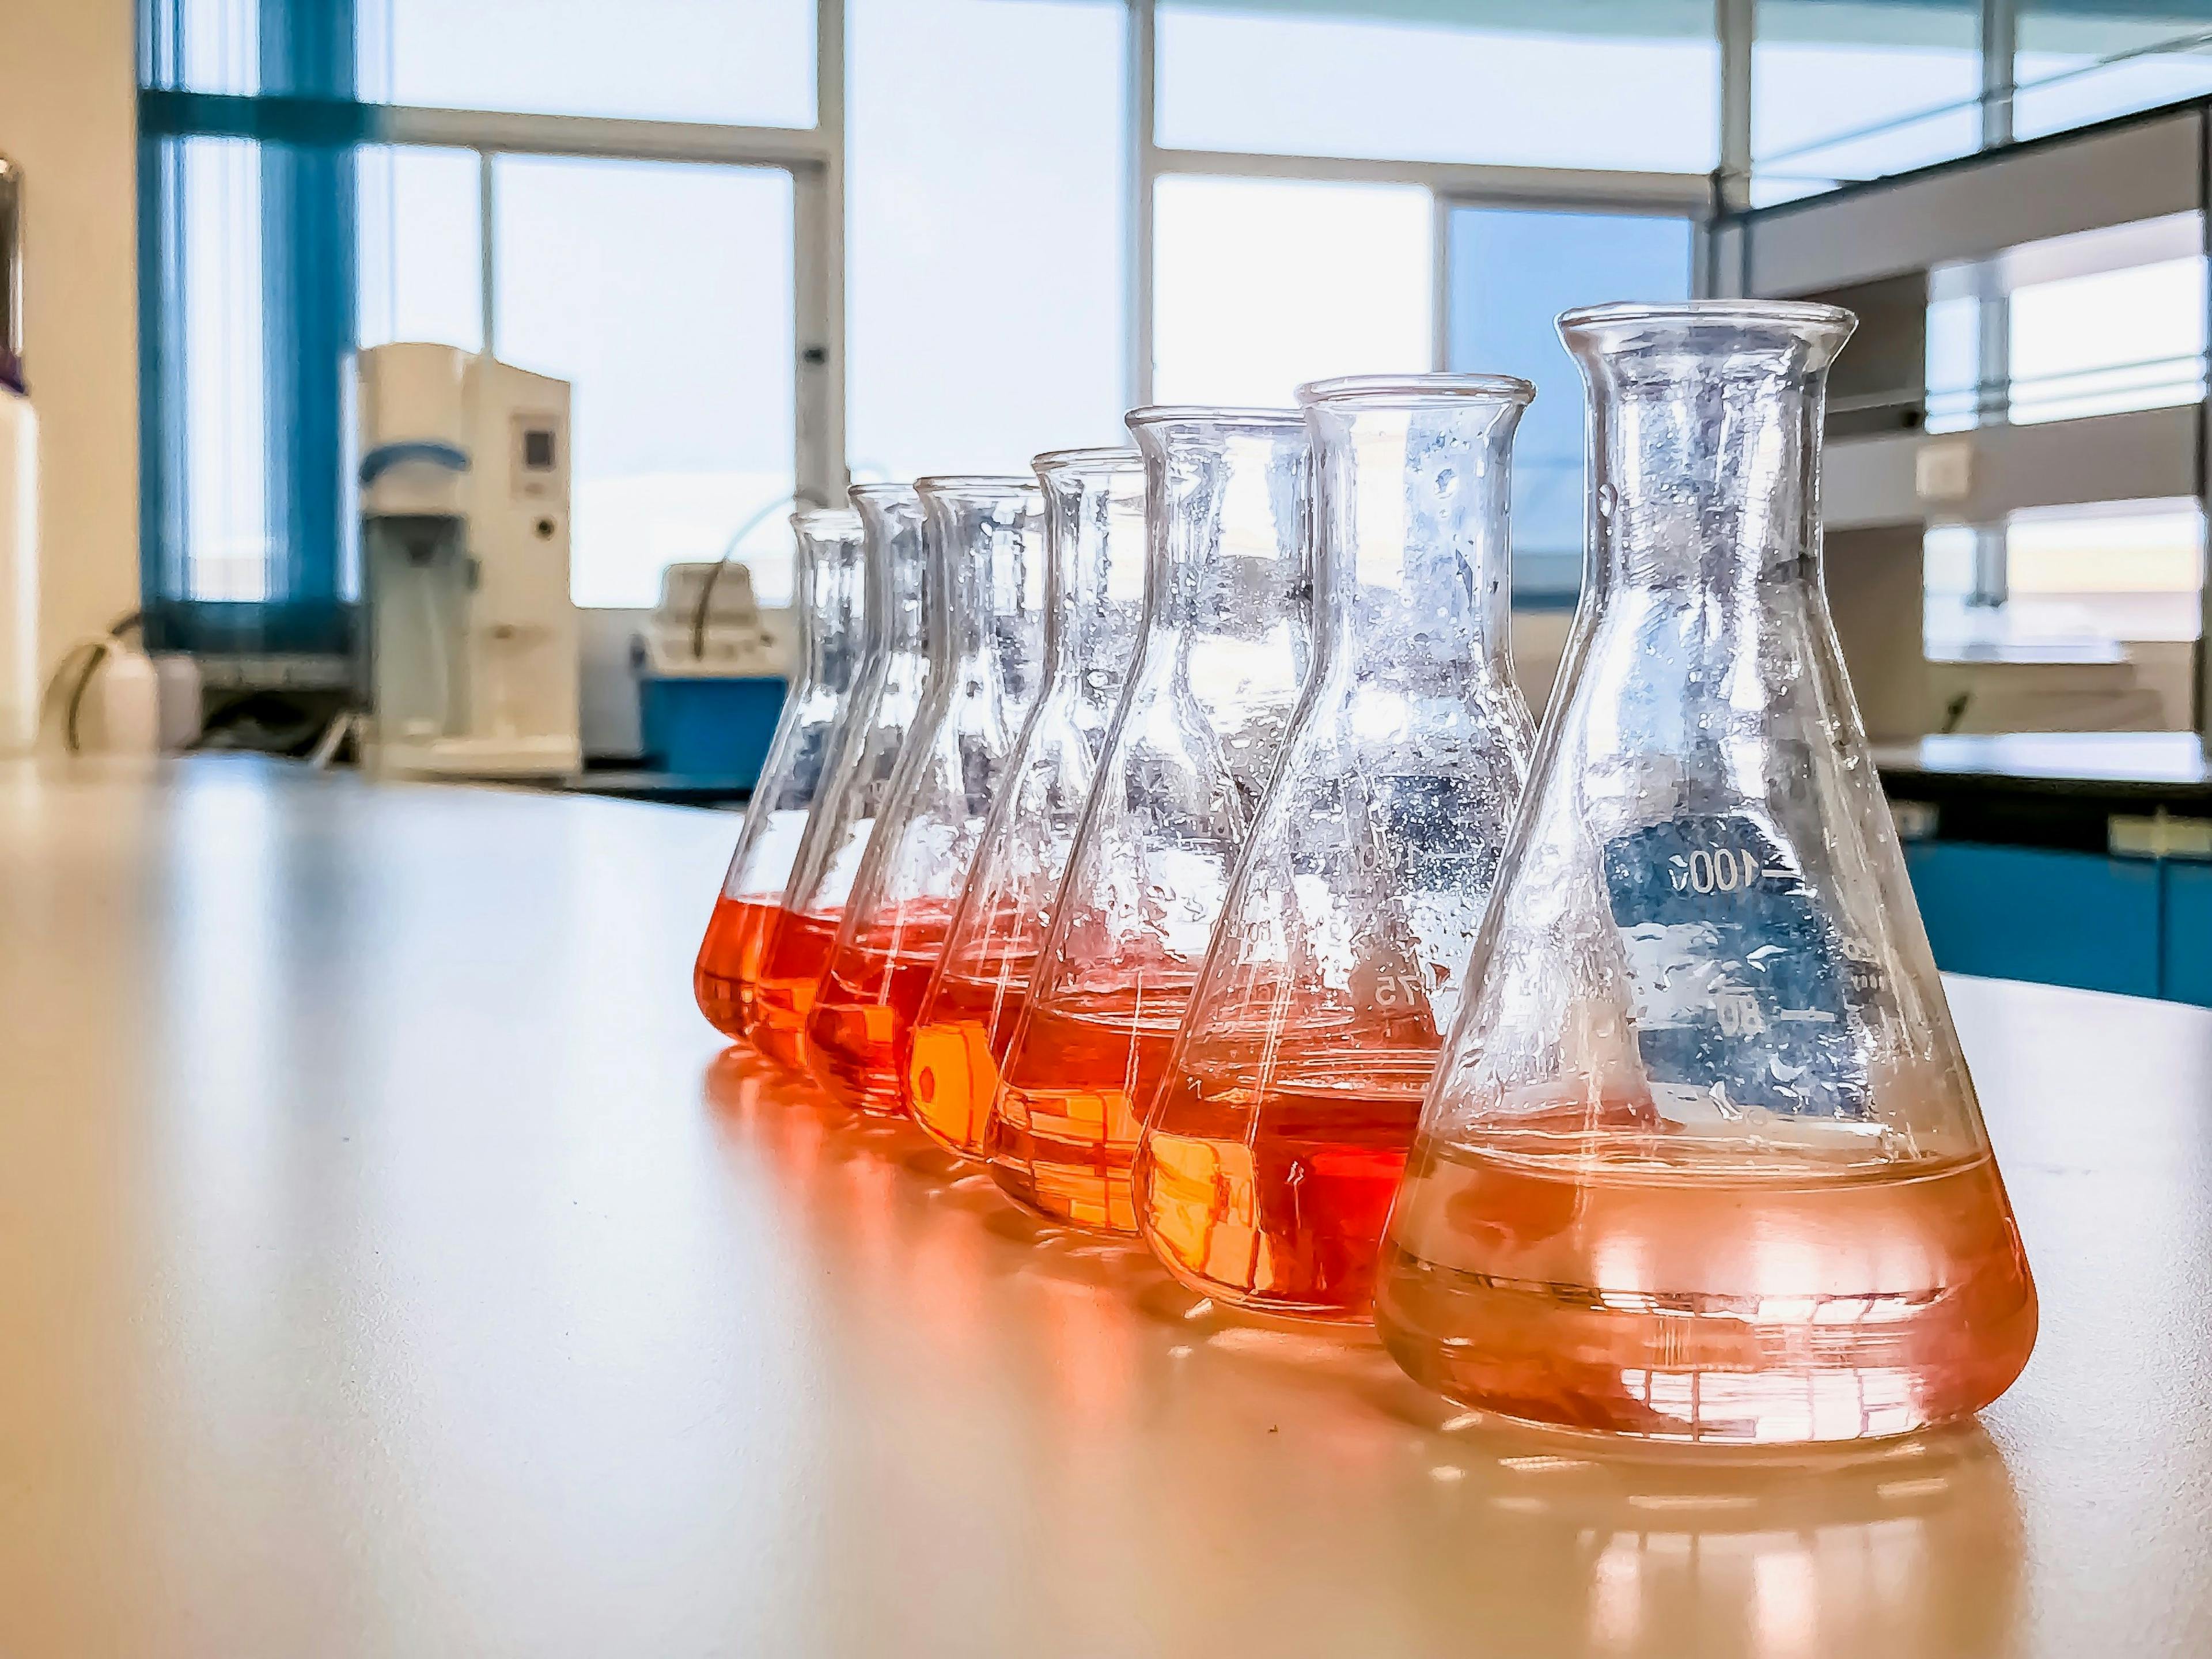 The Erlenmeyer flask in the line with color range solvent using for analysis calibration curve of iron in waste water sample. The experiment in chemistry laboratory. | Image Credit: © Arpon - stock.adobe.com